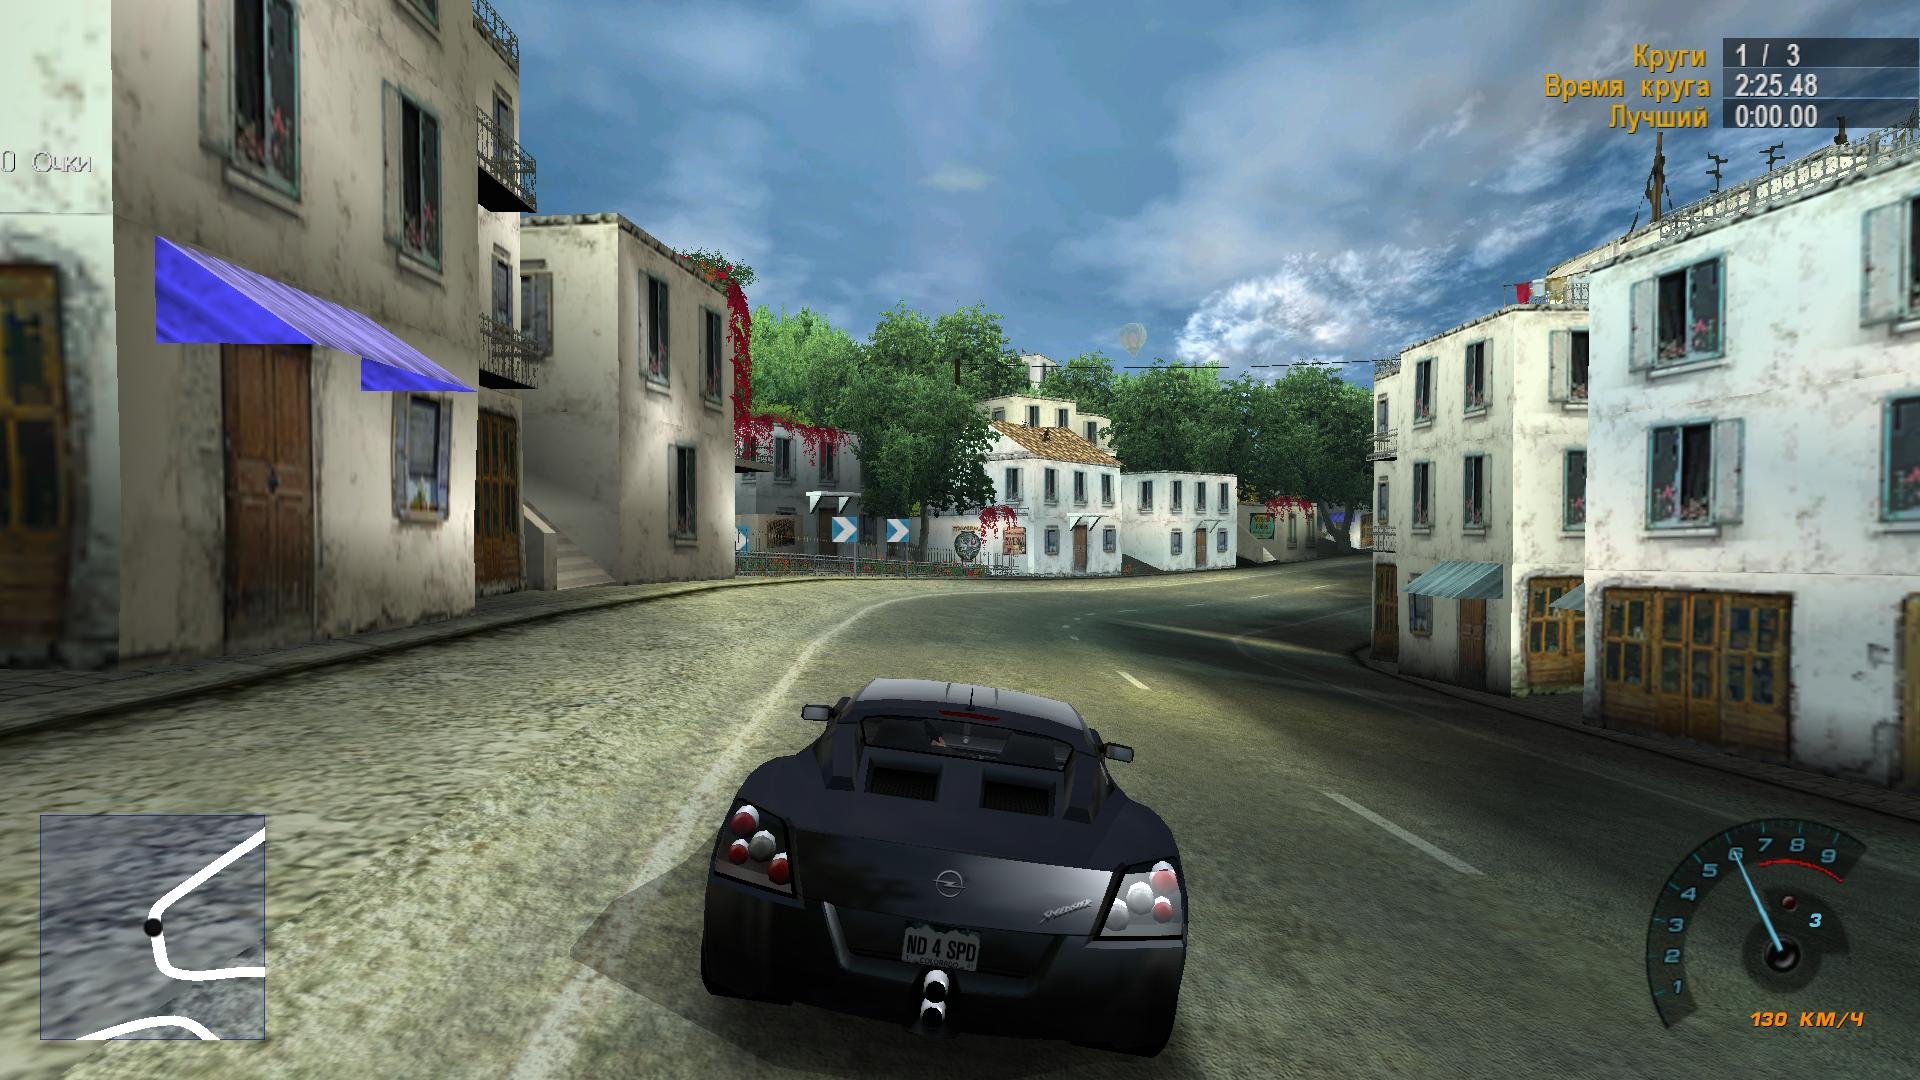 Скриншот 1 к игре Need for Speed: Hot Pursuit 2 PC (2002) RePack от Decepticon